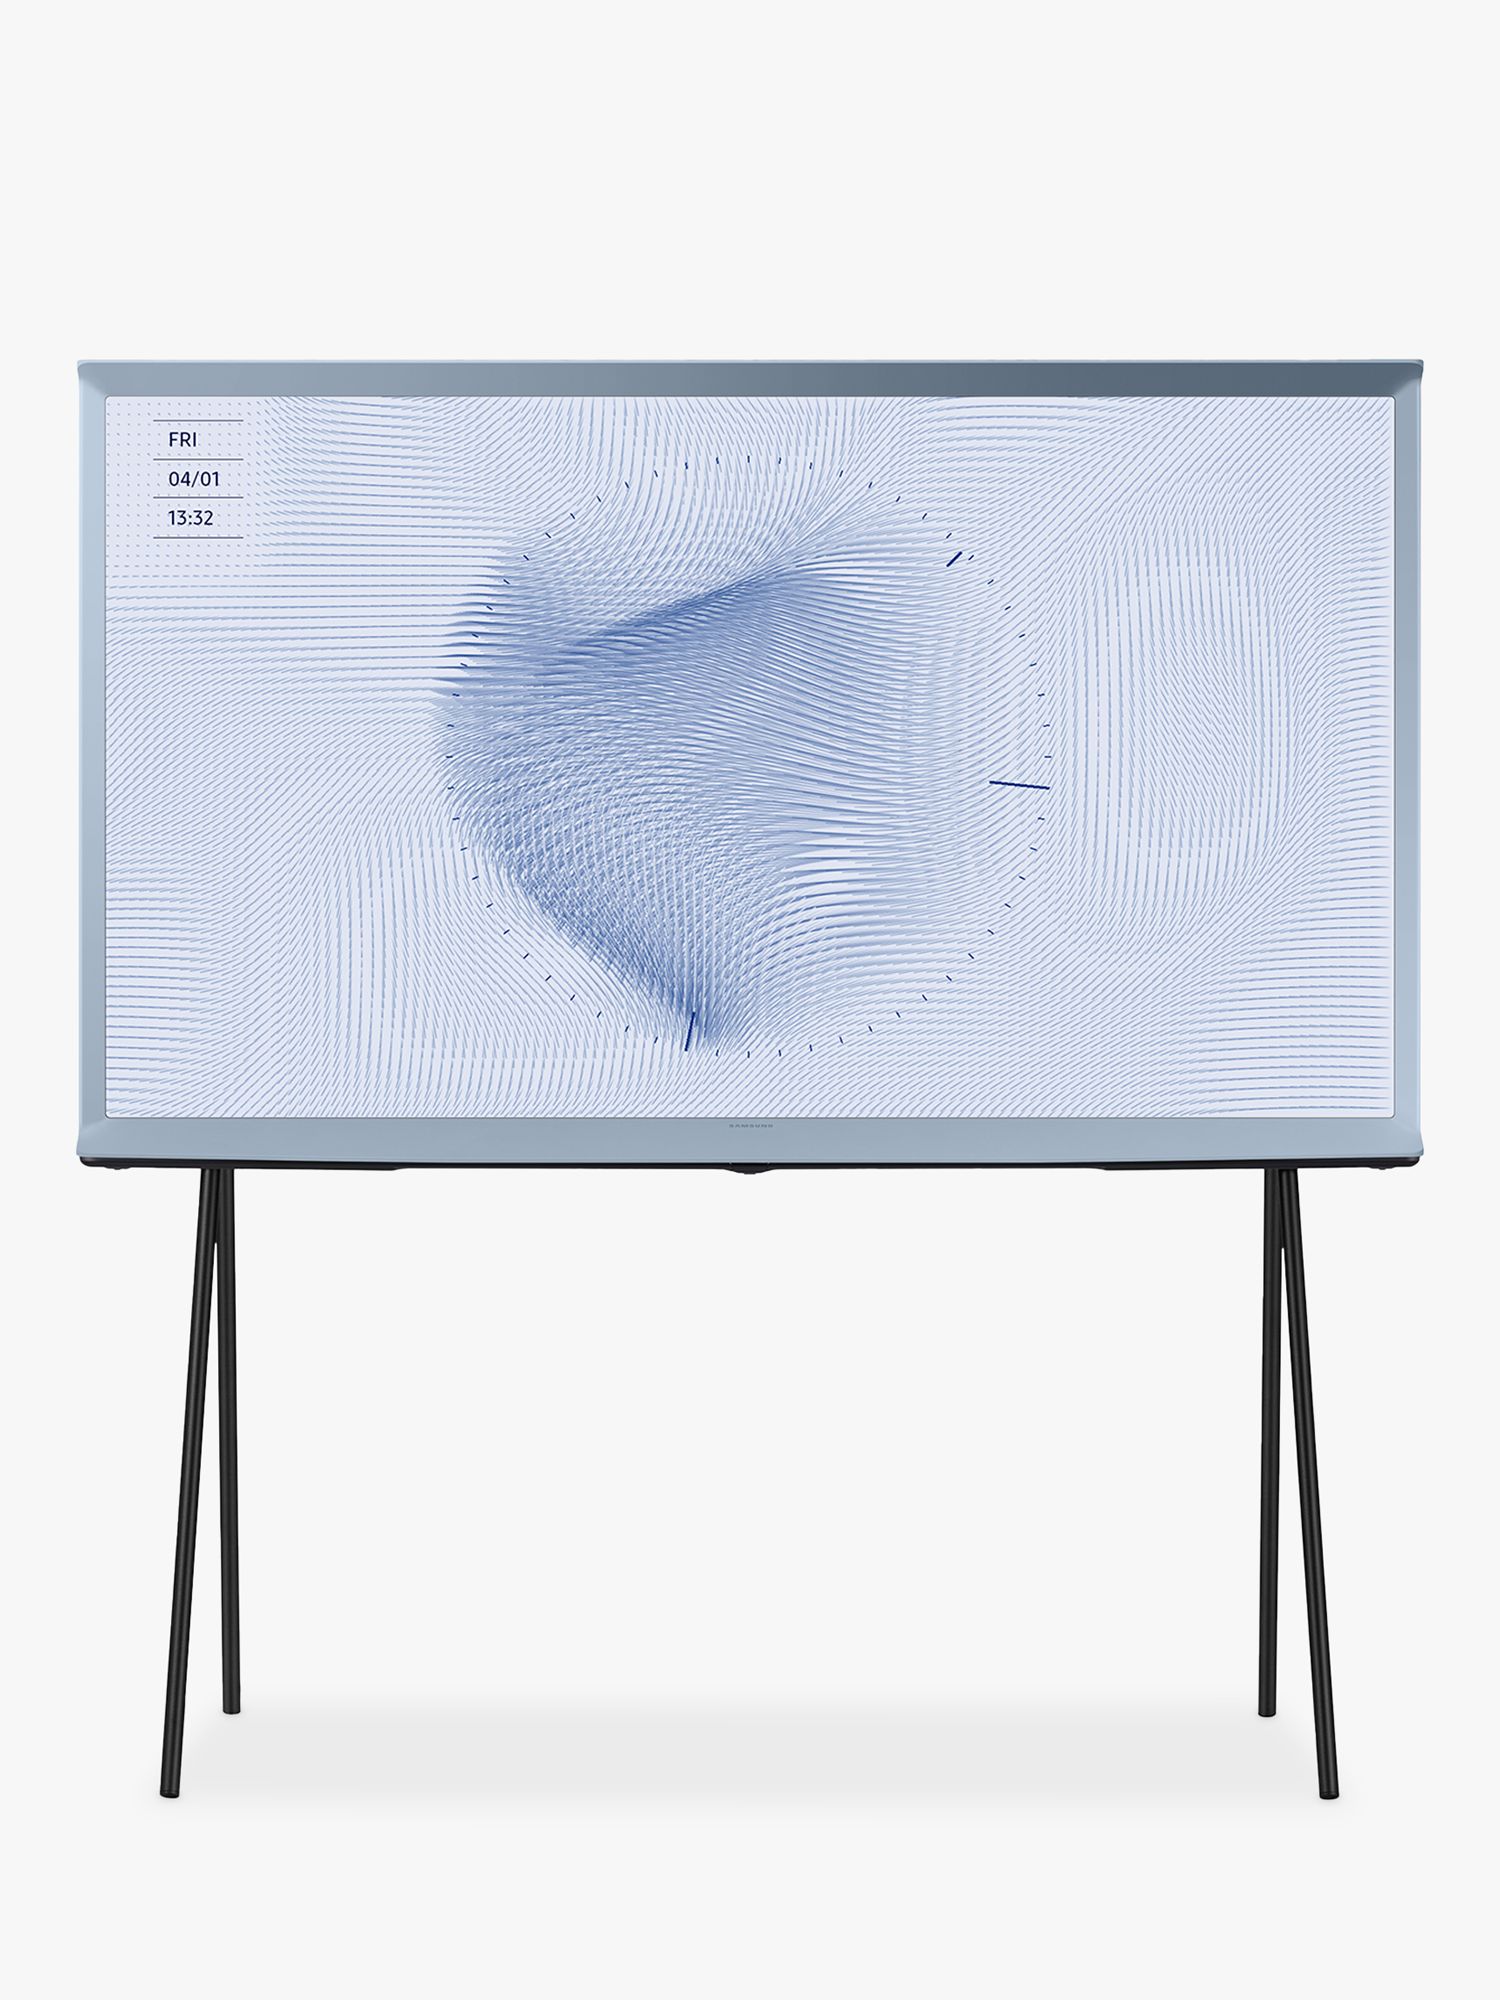 Samsung The Serif (2022) QLED HDR 4K Ultra HD Smart TV, 55 inch with TVPlus & Bouroullec Brothers Design